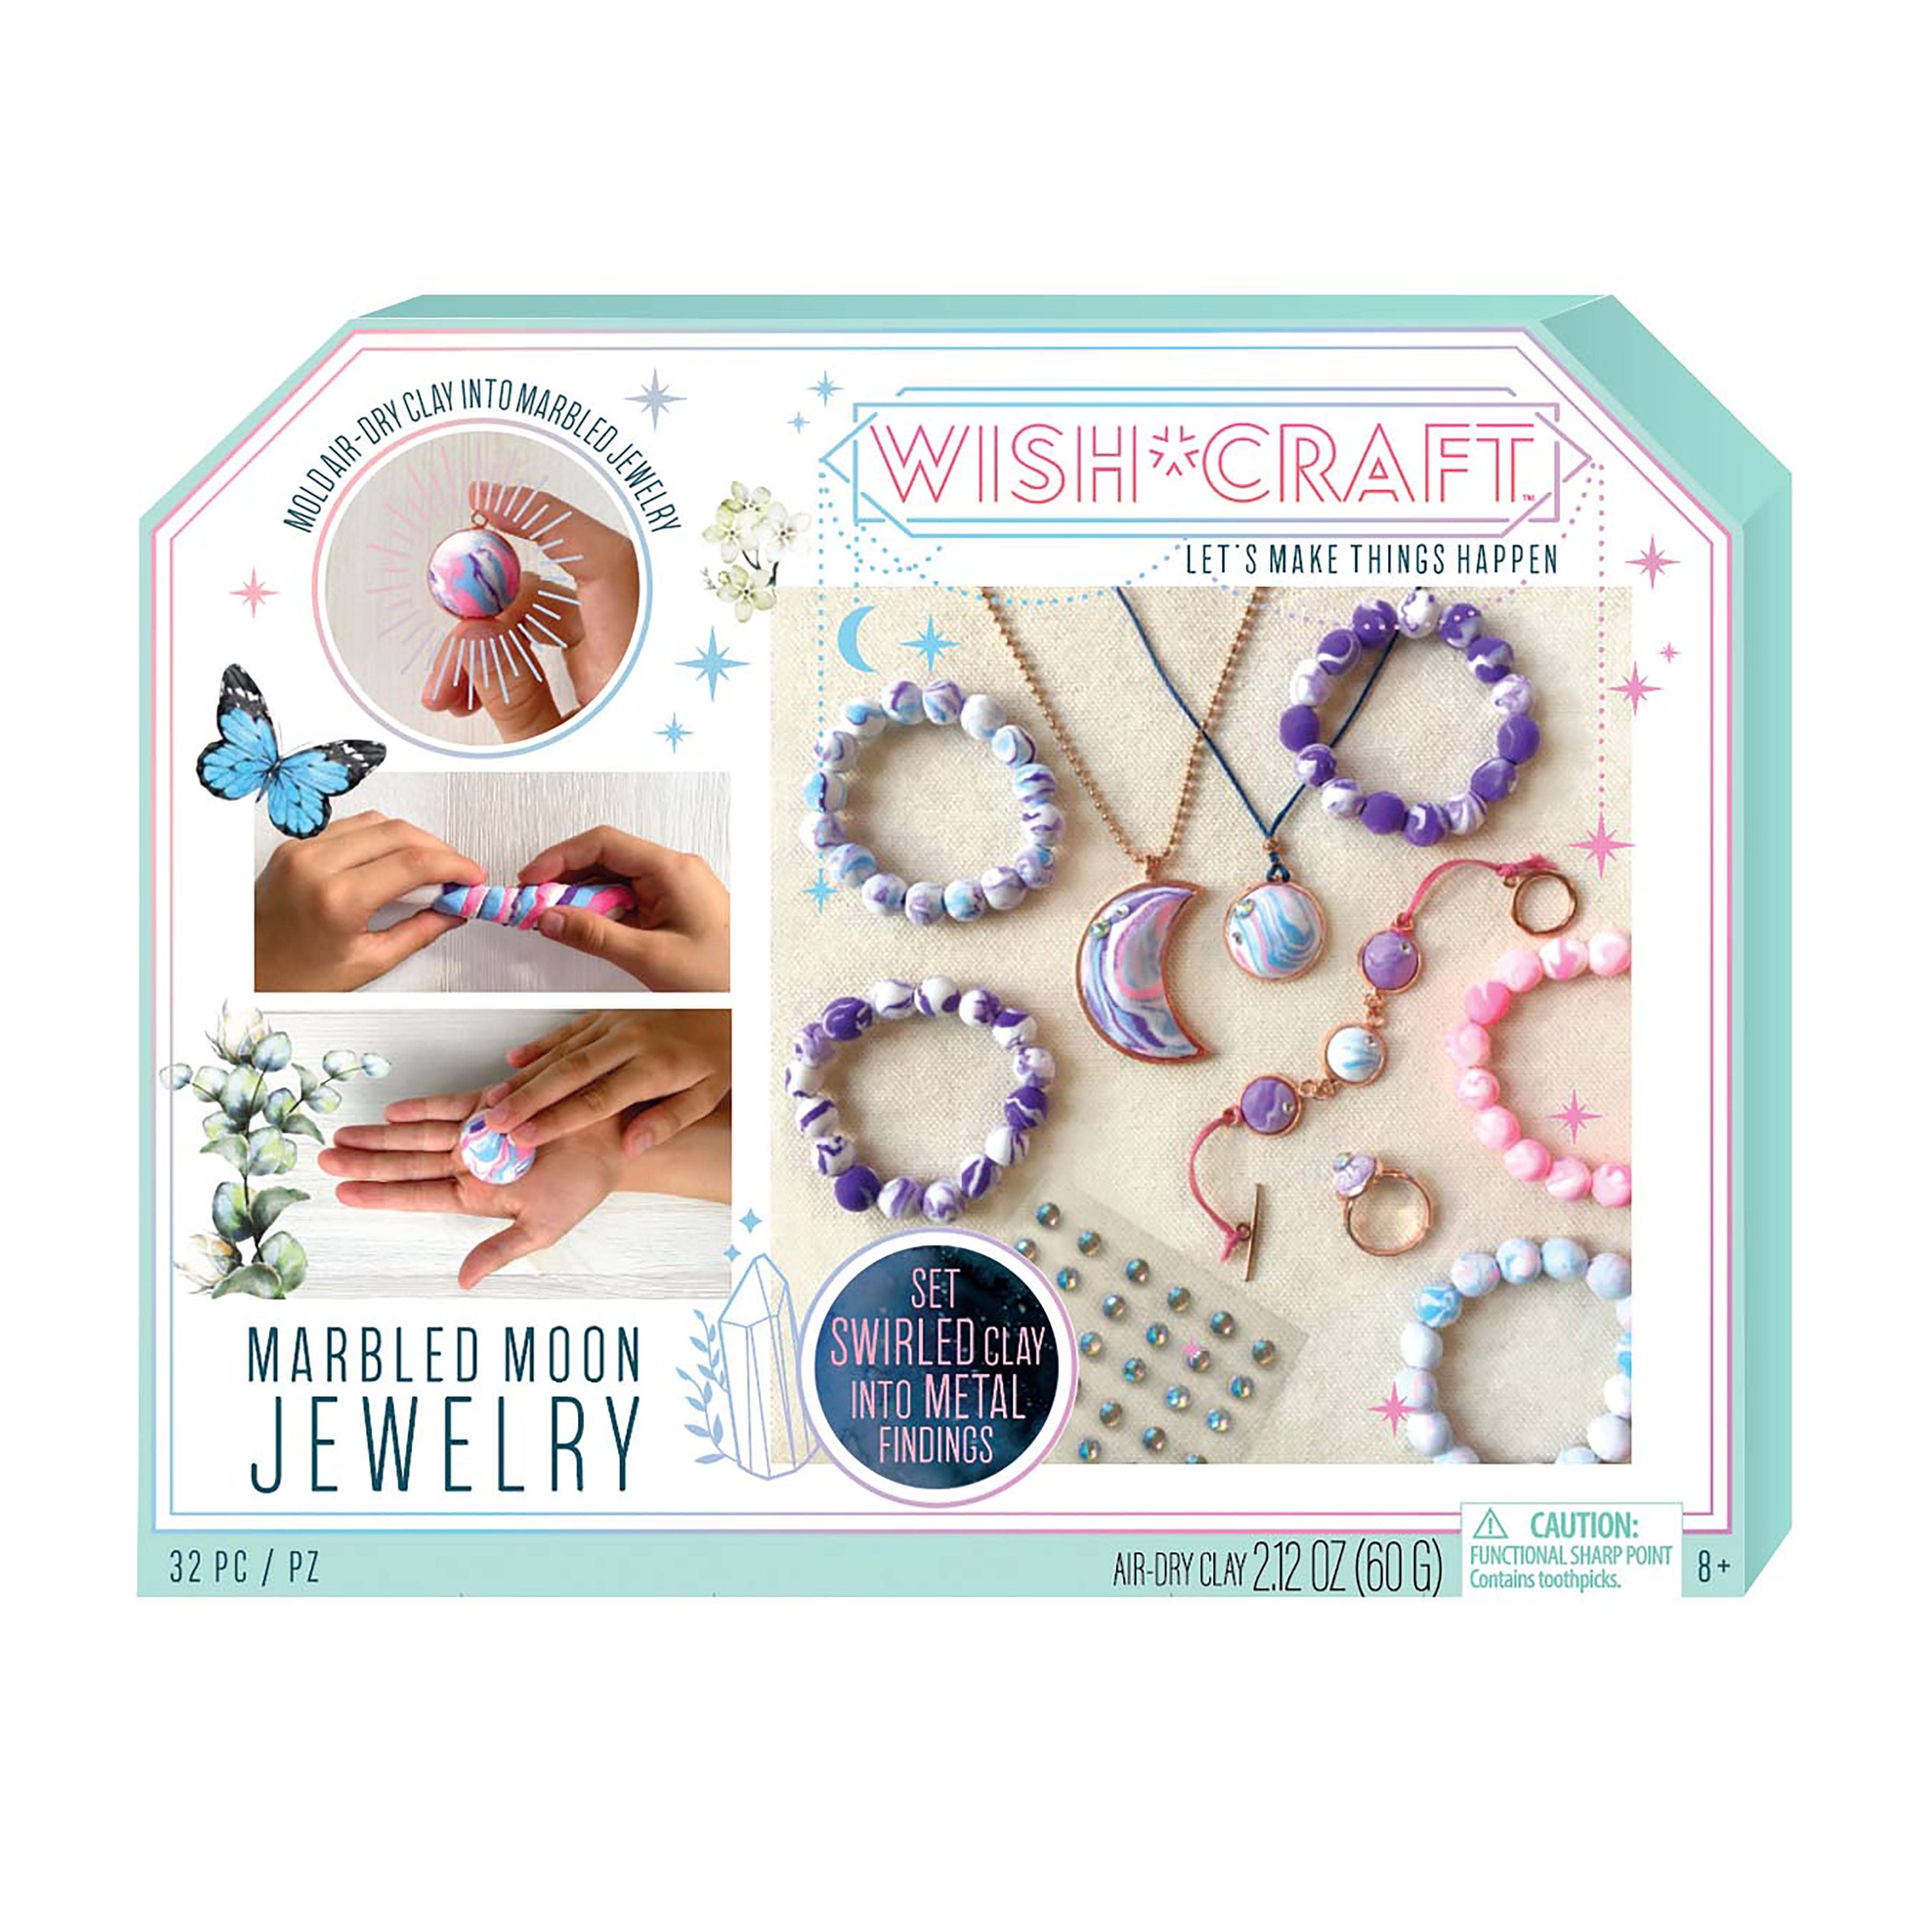 Marbled Moon Jewelry Craft Kit